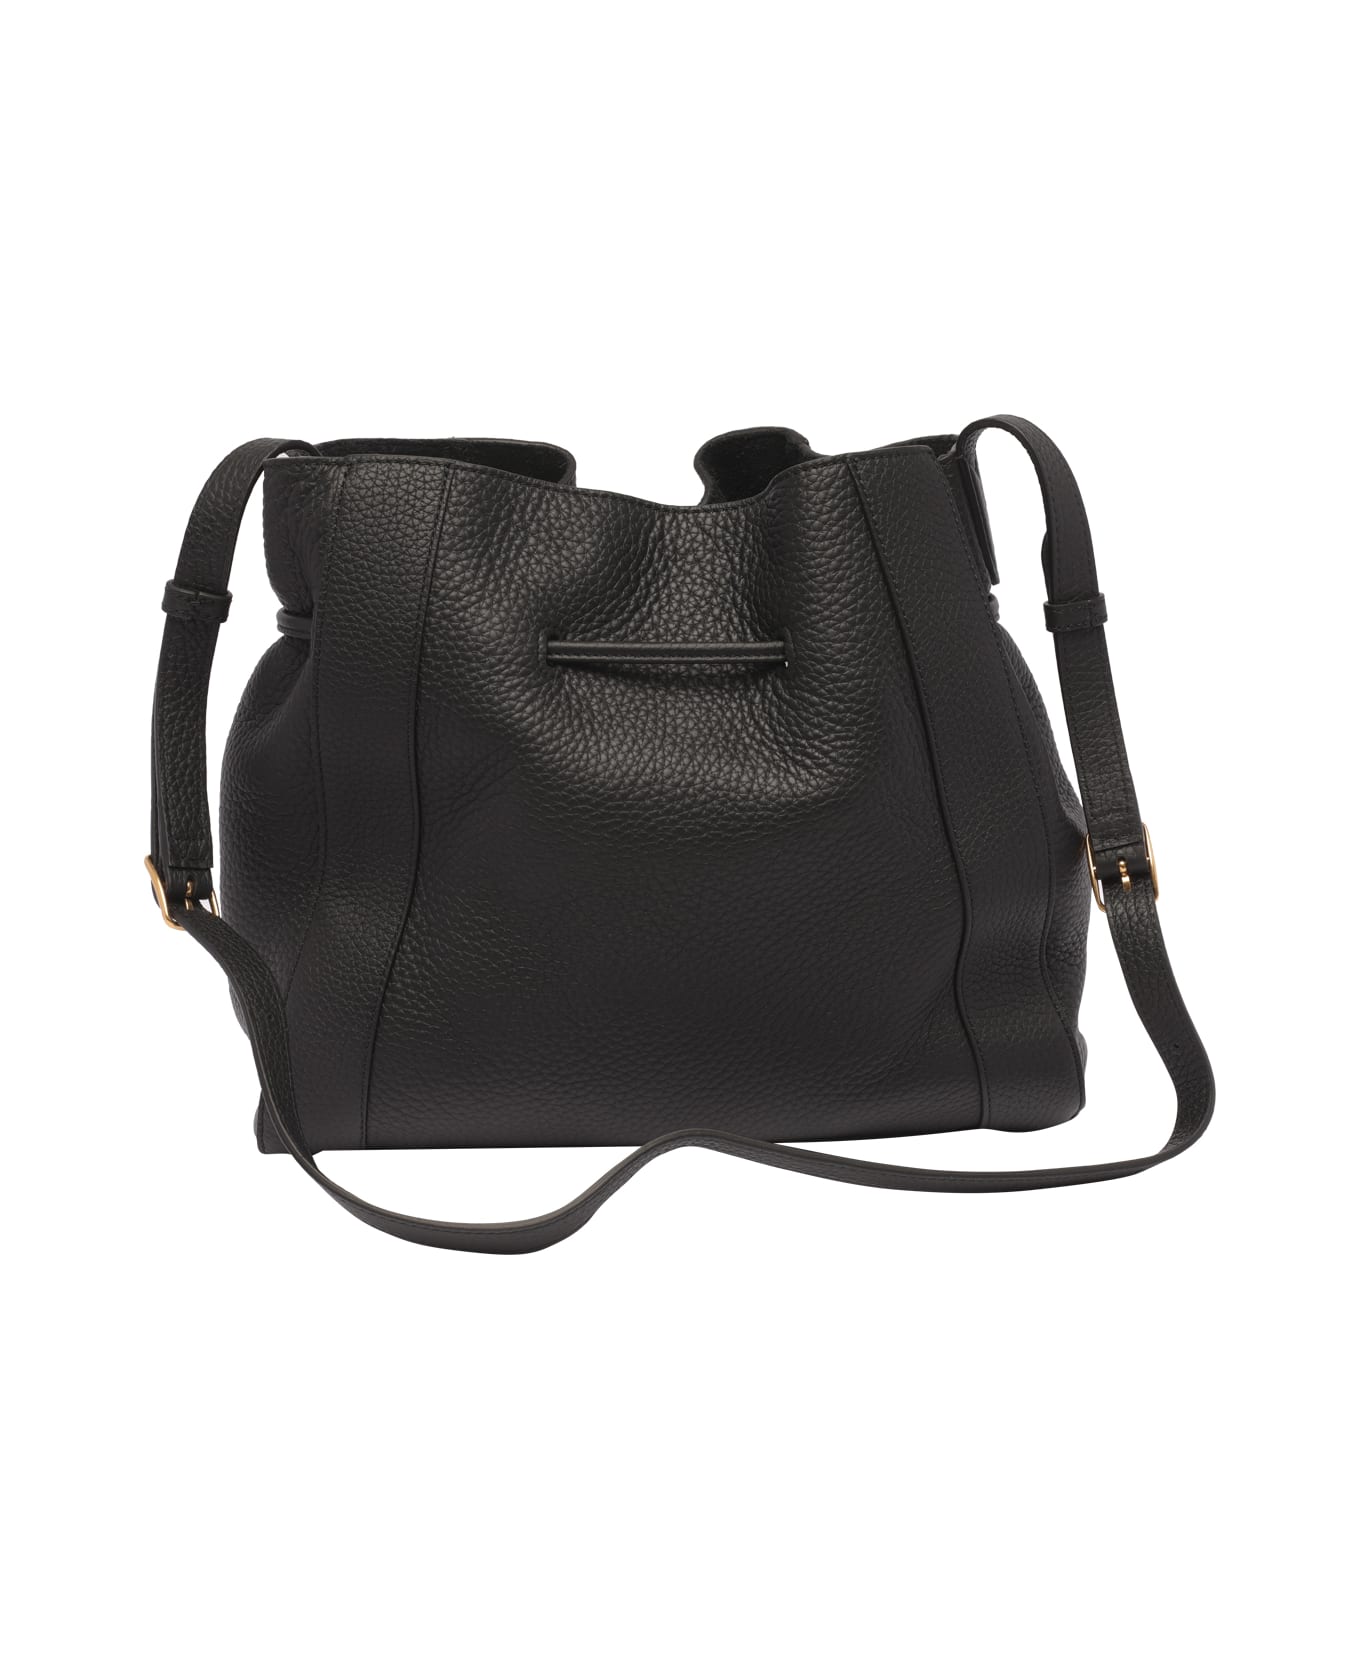 Mulberry Small Millie Tote Bag | italist